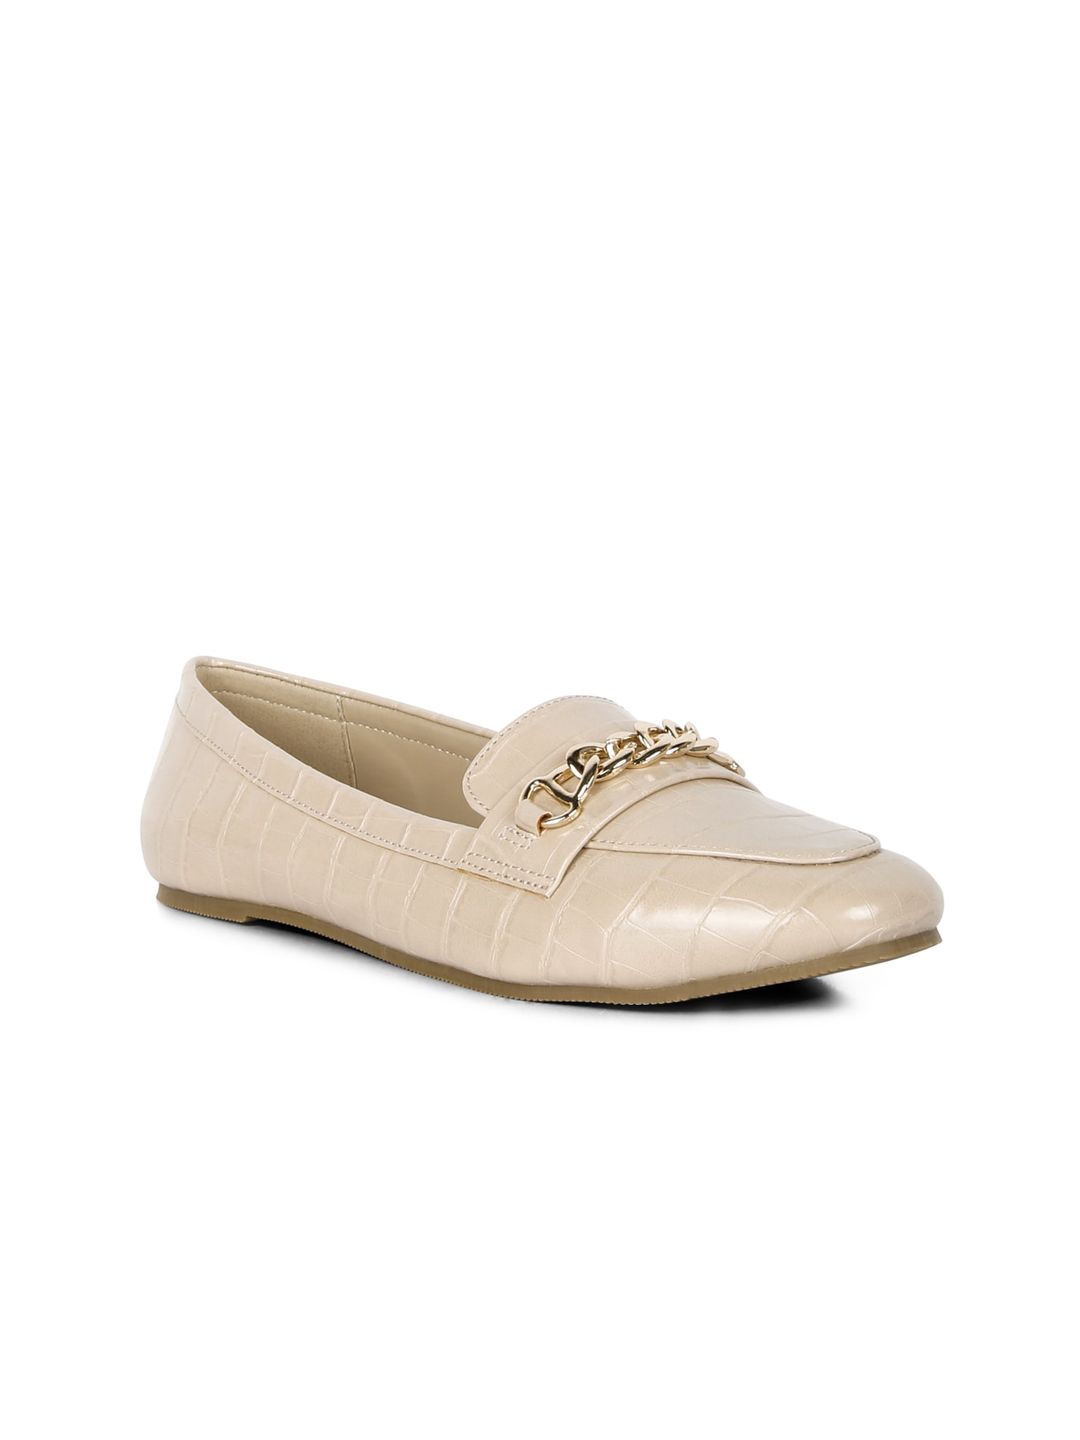 London Rag Women Embellished Loafers Price in India